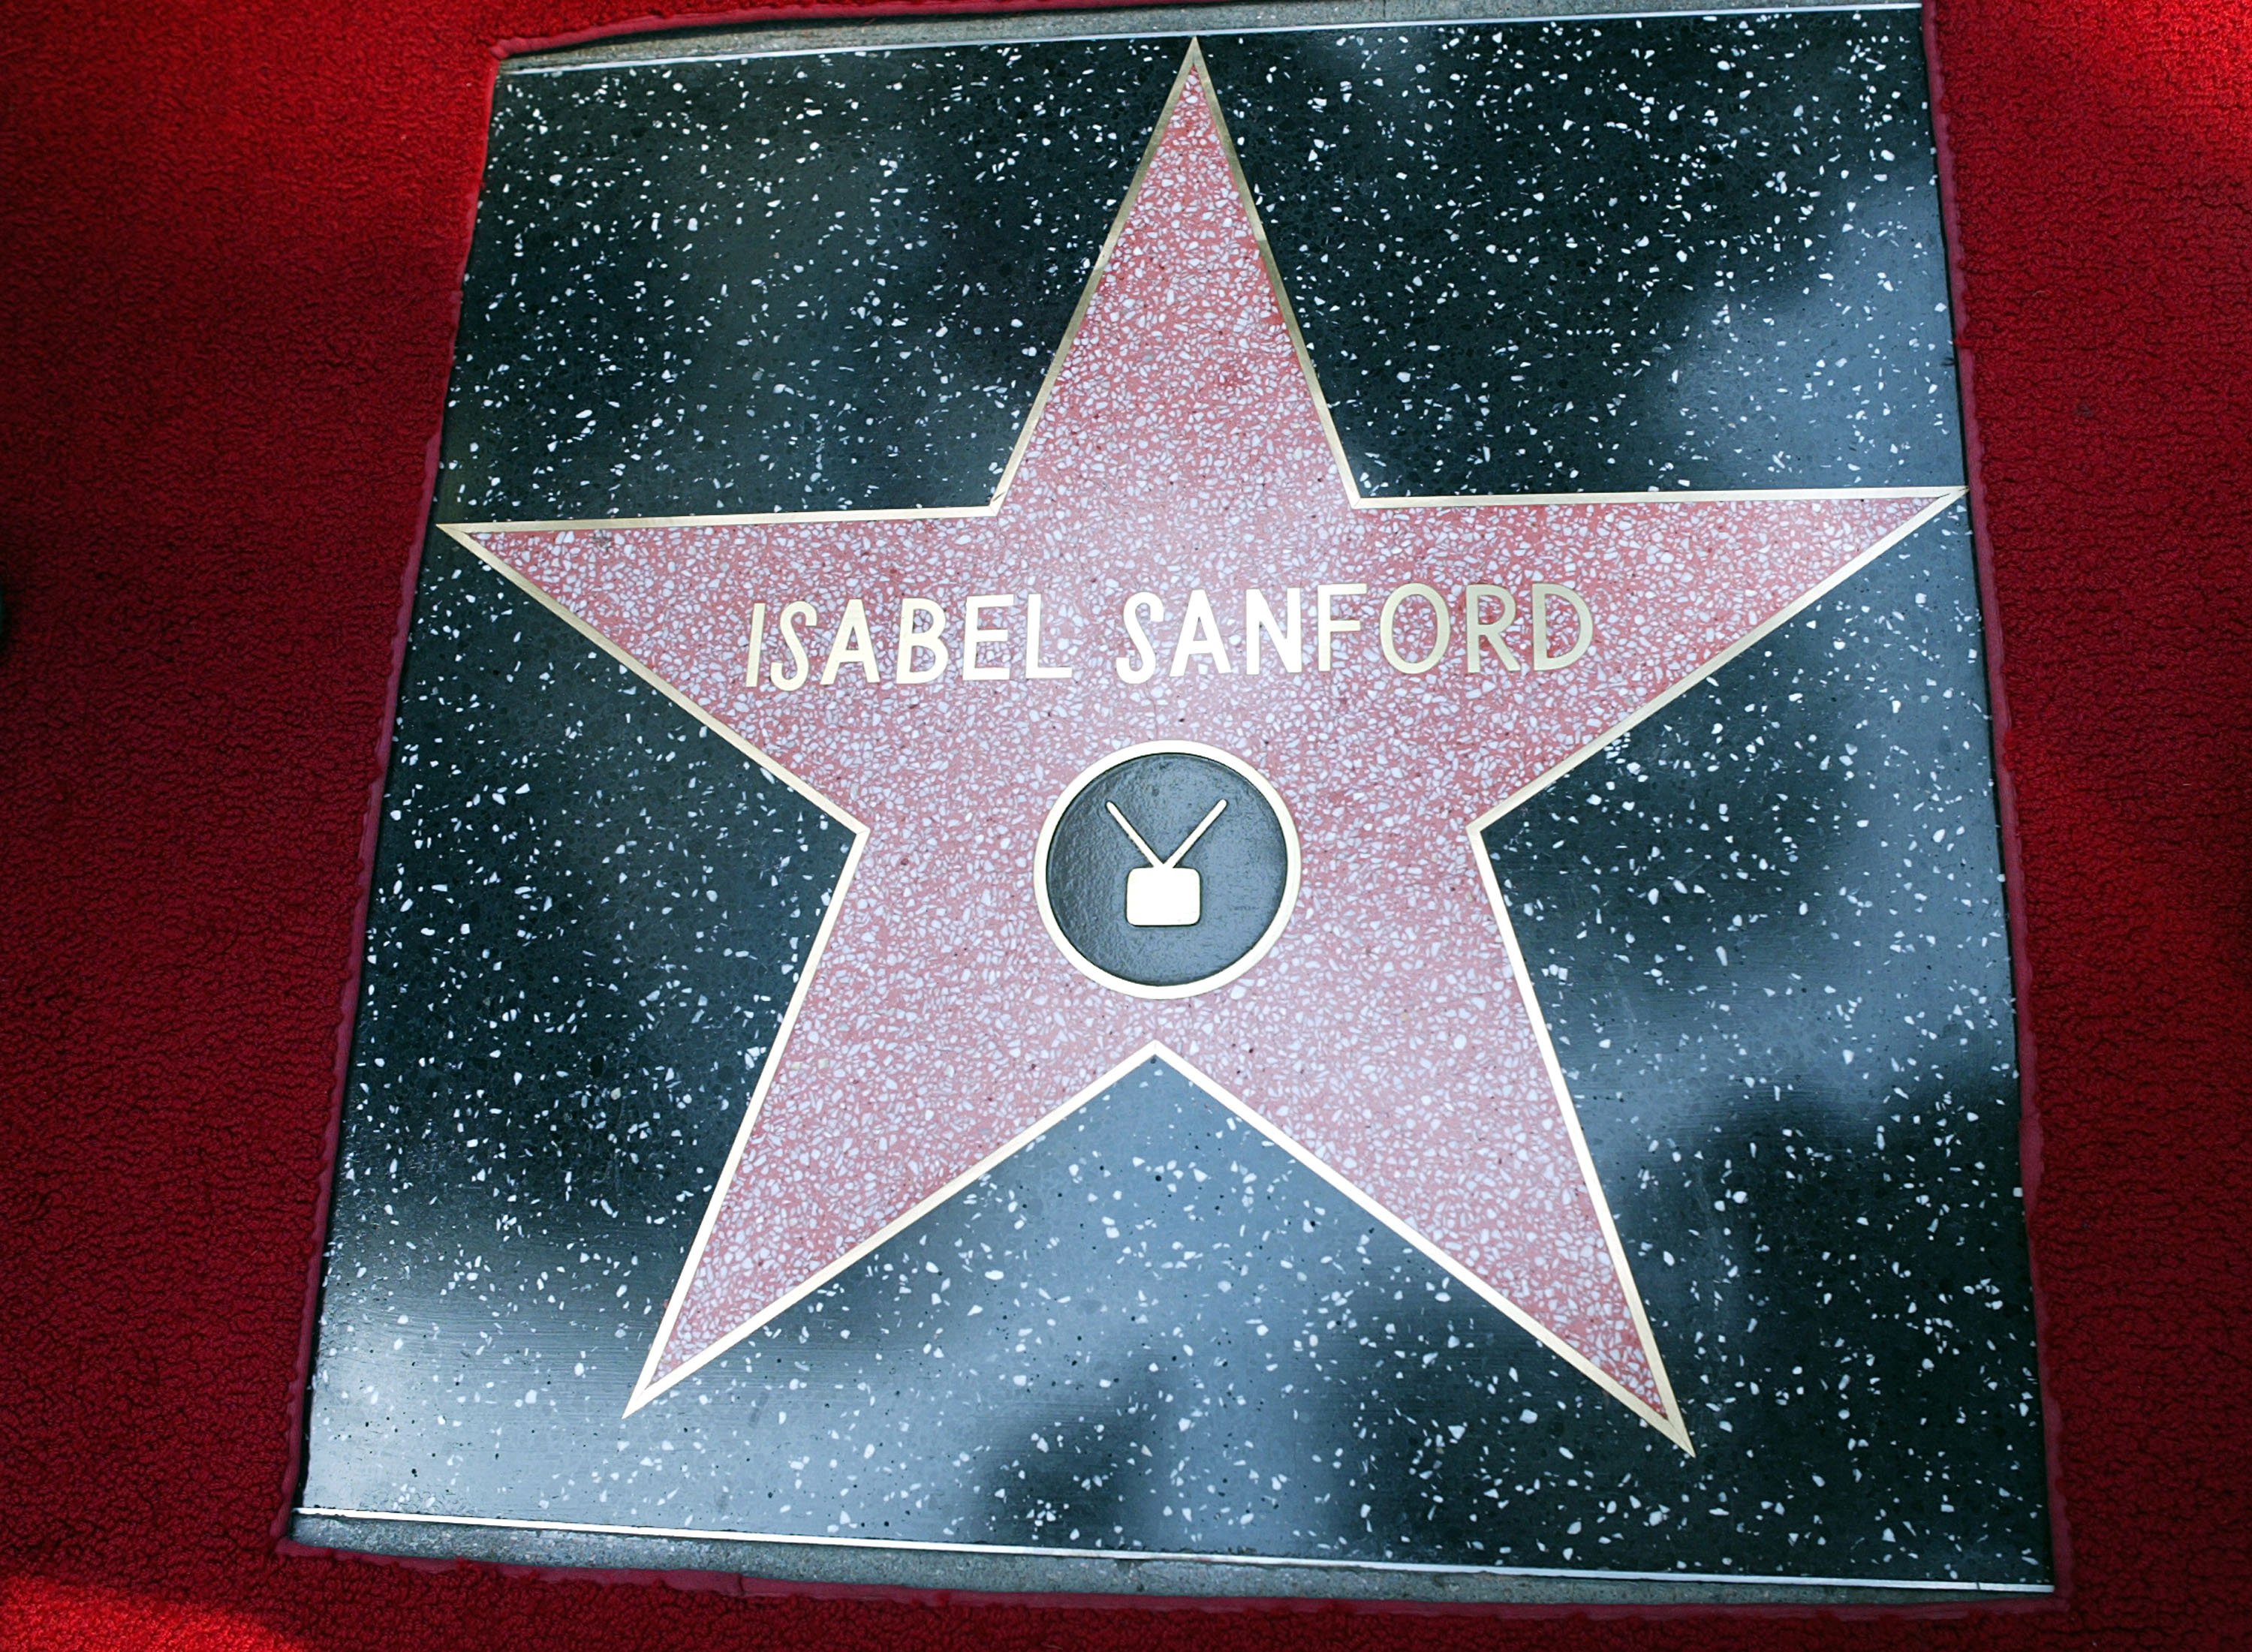  Isabel Sanford's star on the Hollywood Walk of Fame in Los Angeles, California | Photo: Kevin Winter/Getty Images